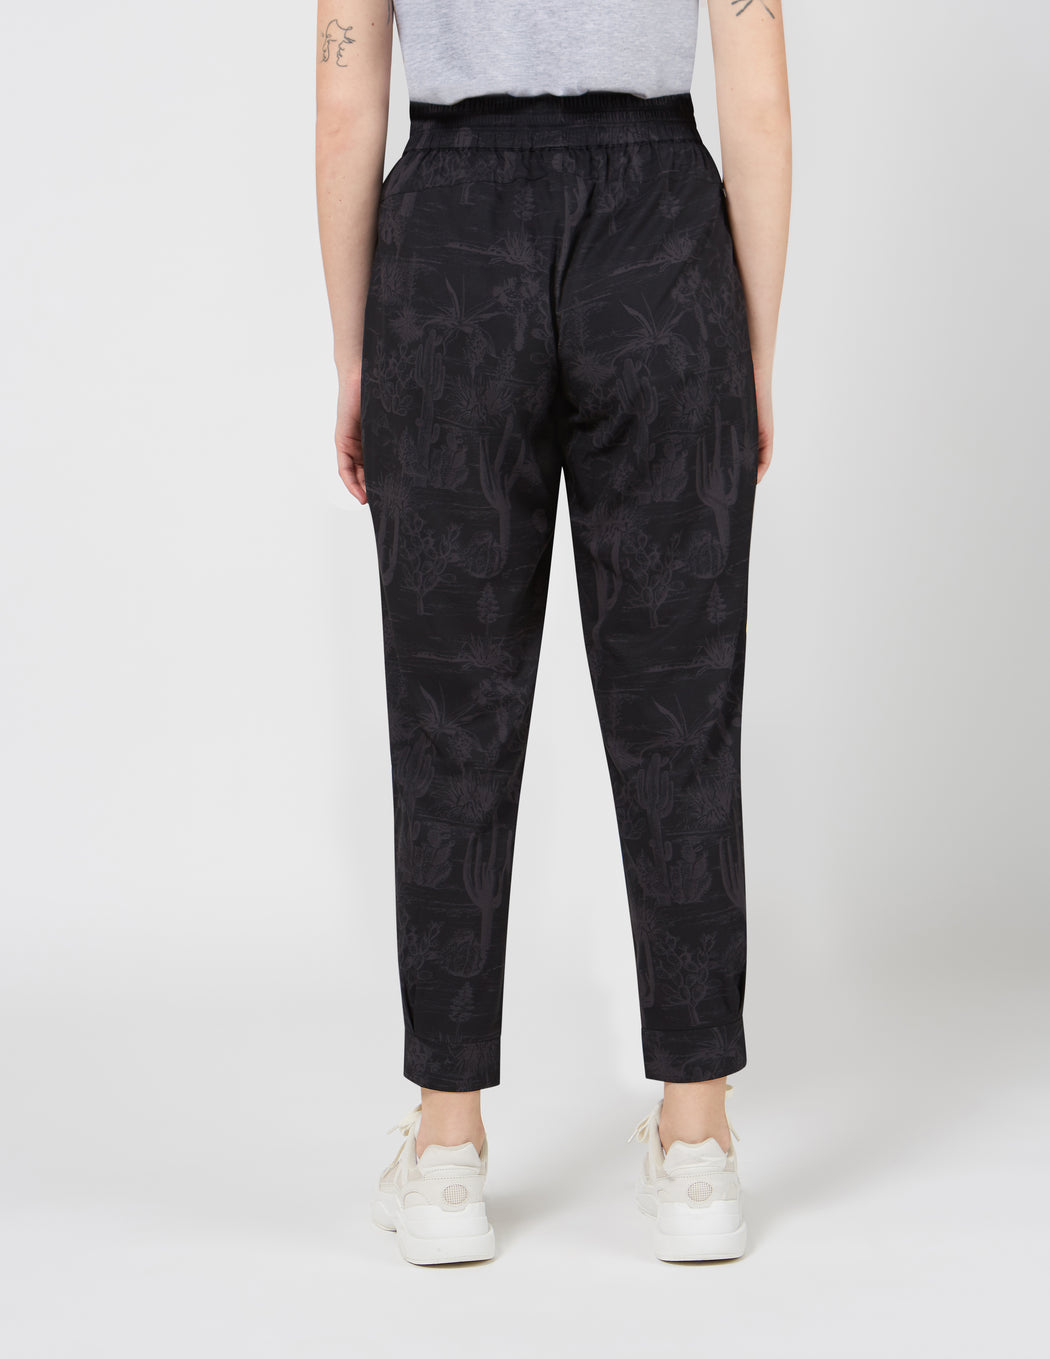 Women's SHABA Pants - Repreve® Recycled Polyester